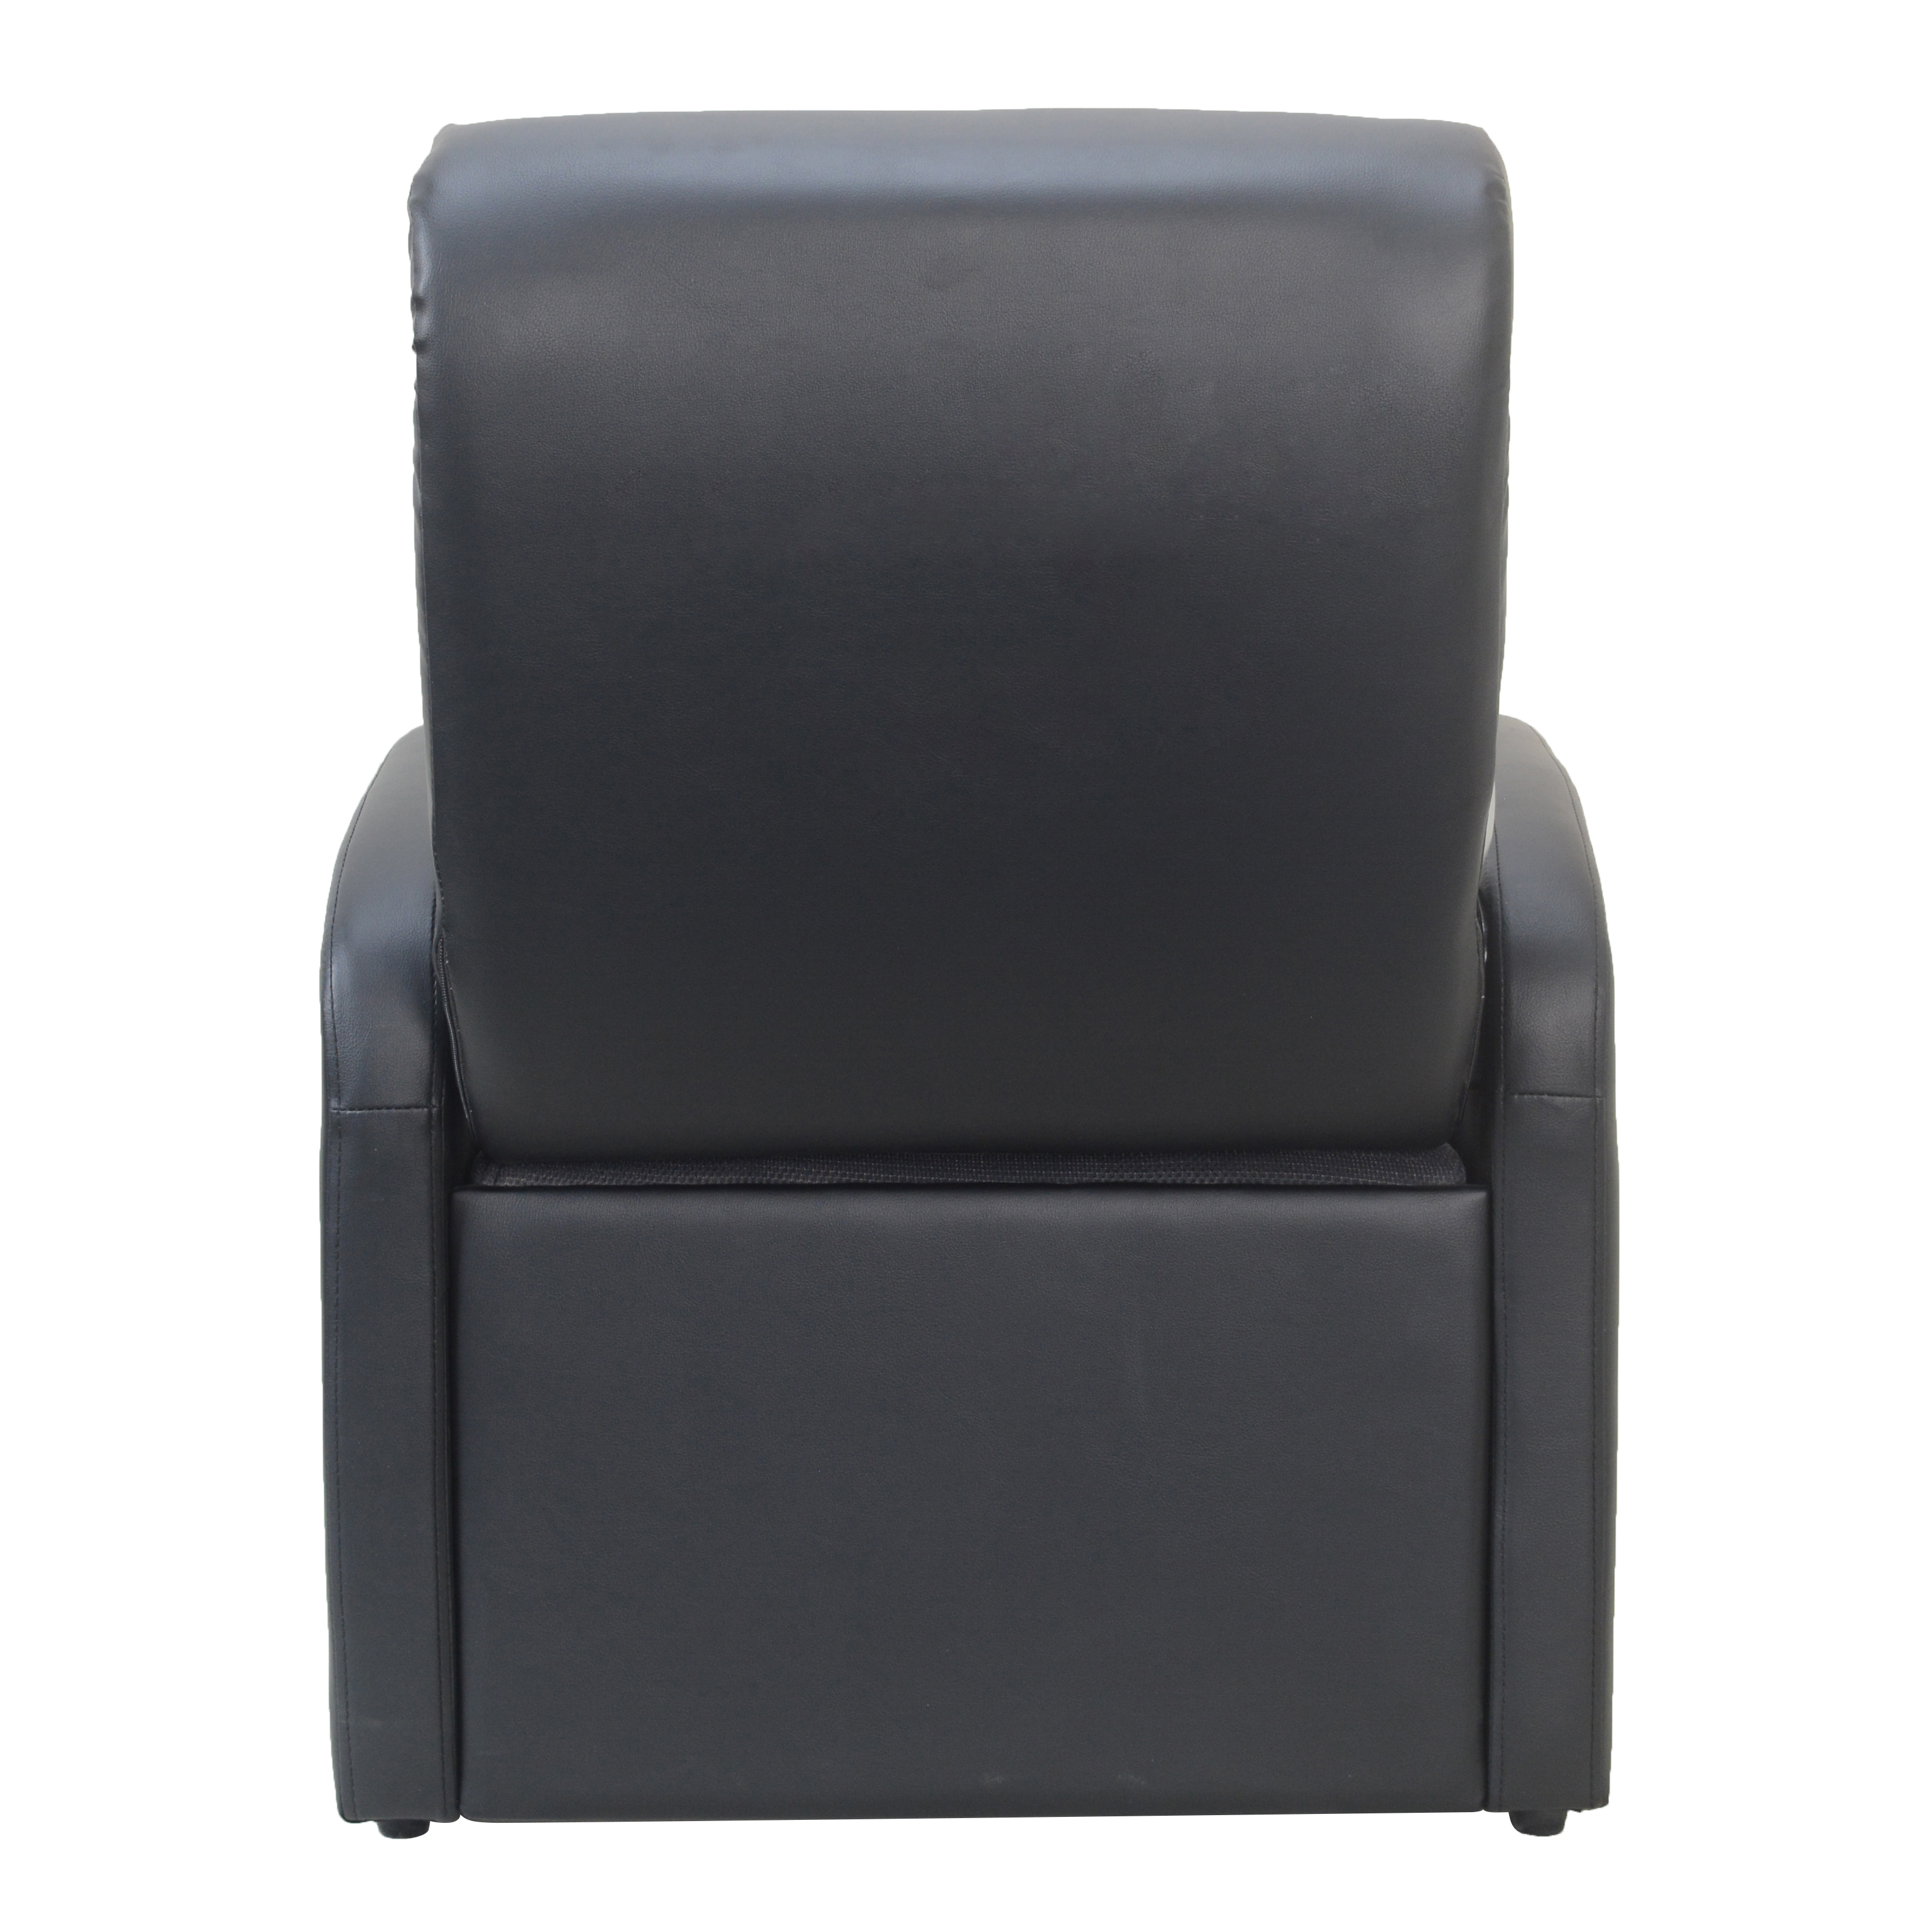 X Rocker 2.0 Flip Gaming Chair with Storage | Child and Teen | Black/Gray | 25.59 x 26.77 x 35.04 inches - image 3 of 6